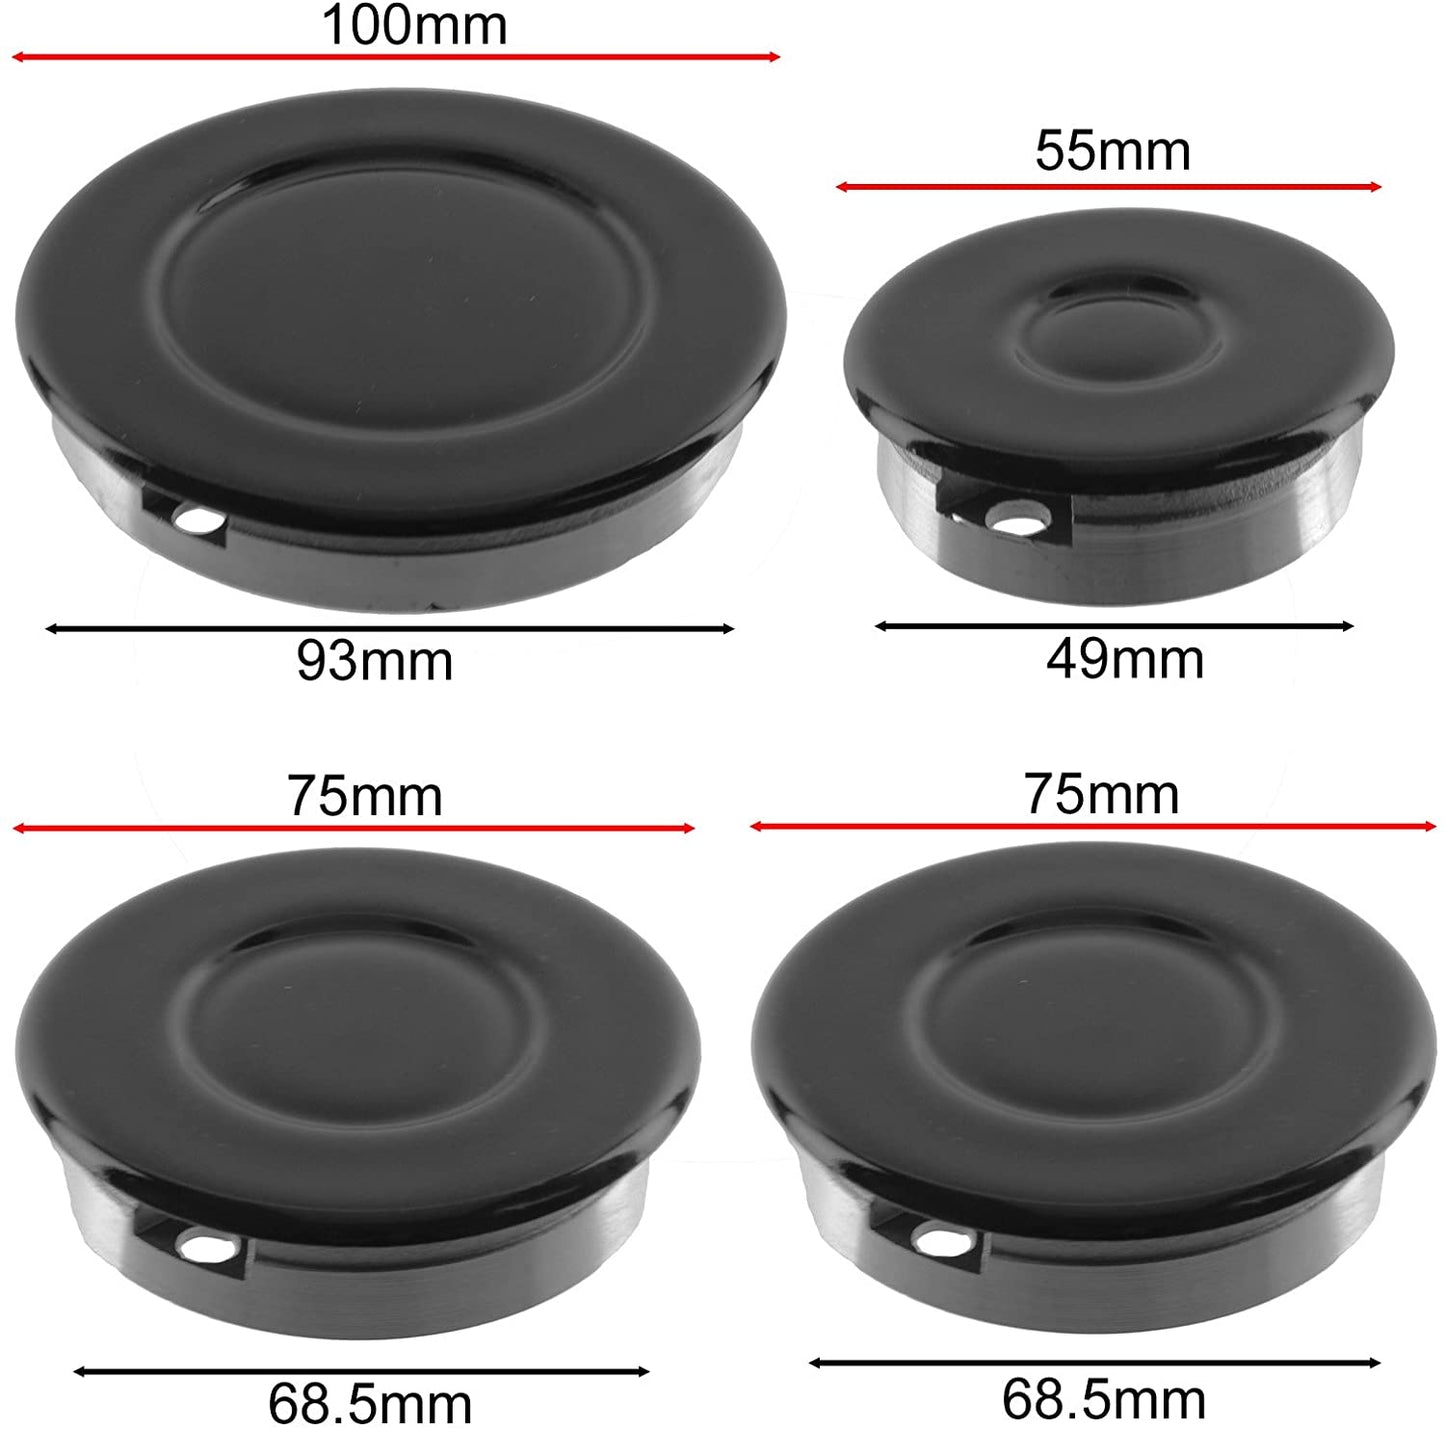 Gas Stove Cooktop Burner Wok Burner Oven Cooker Hob Gas Burner Crown & Flame Cap Kit ( Small, 2 Medium & Large, 55mm - 100mm) Spare Parts Accessory Replacement